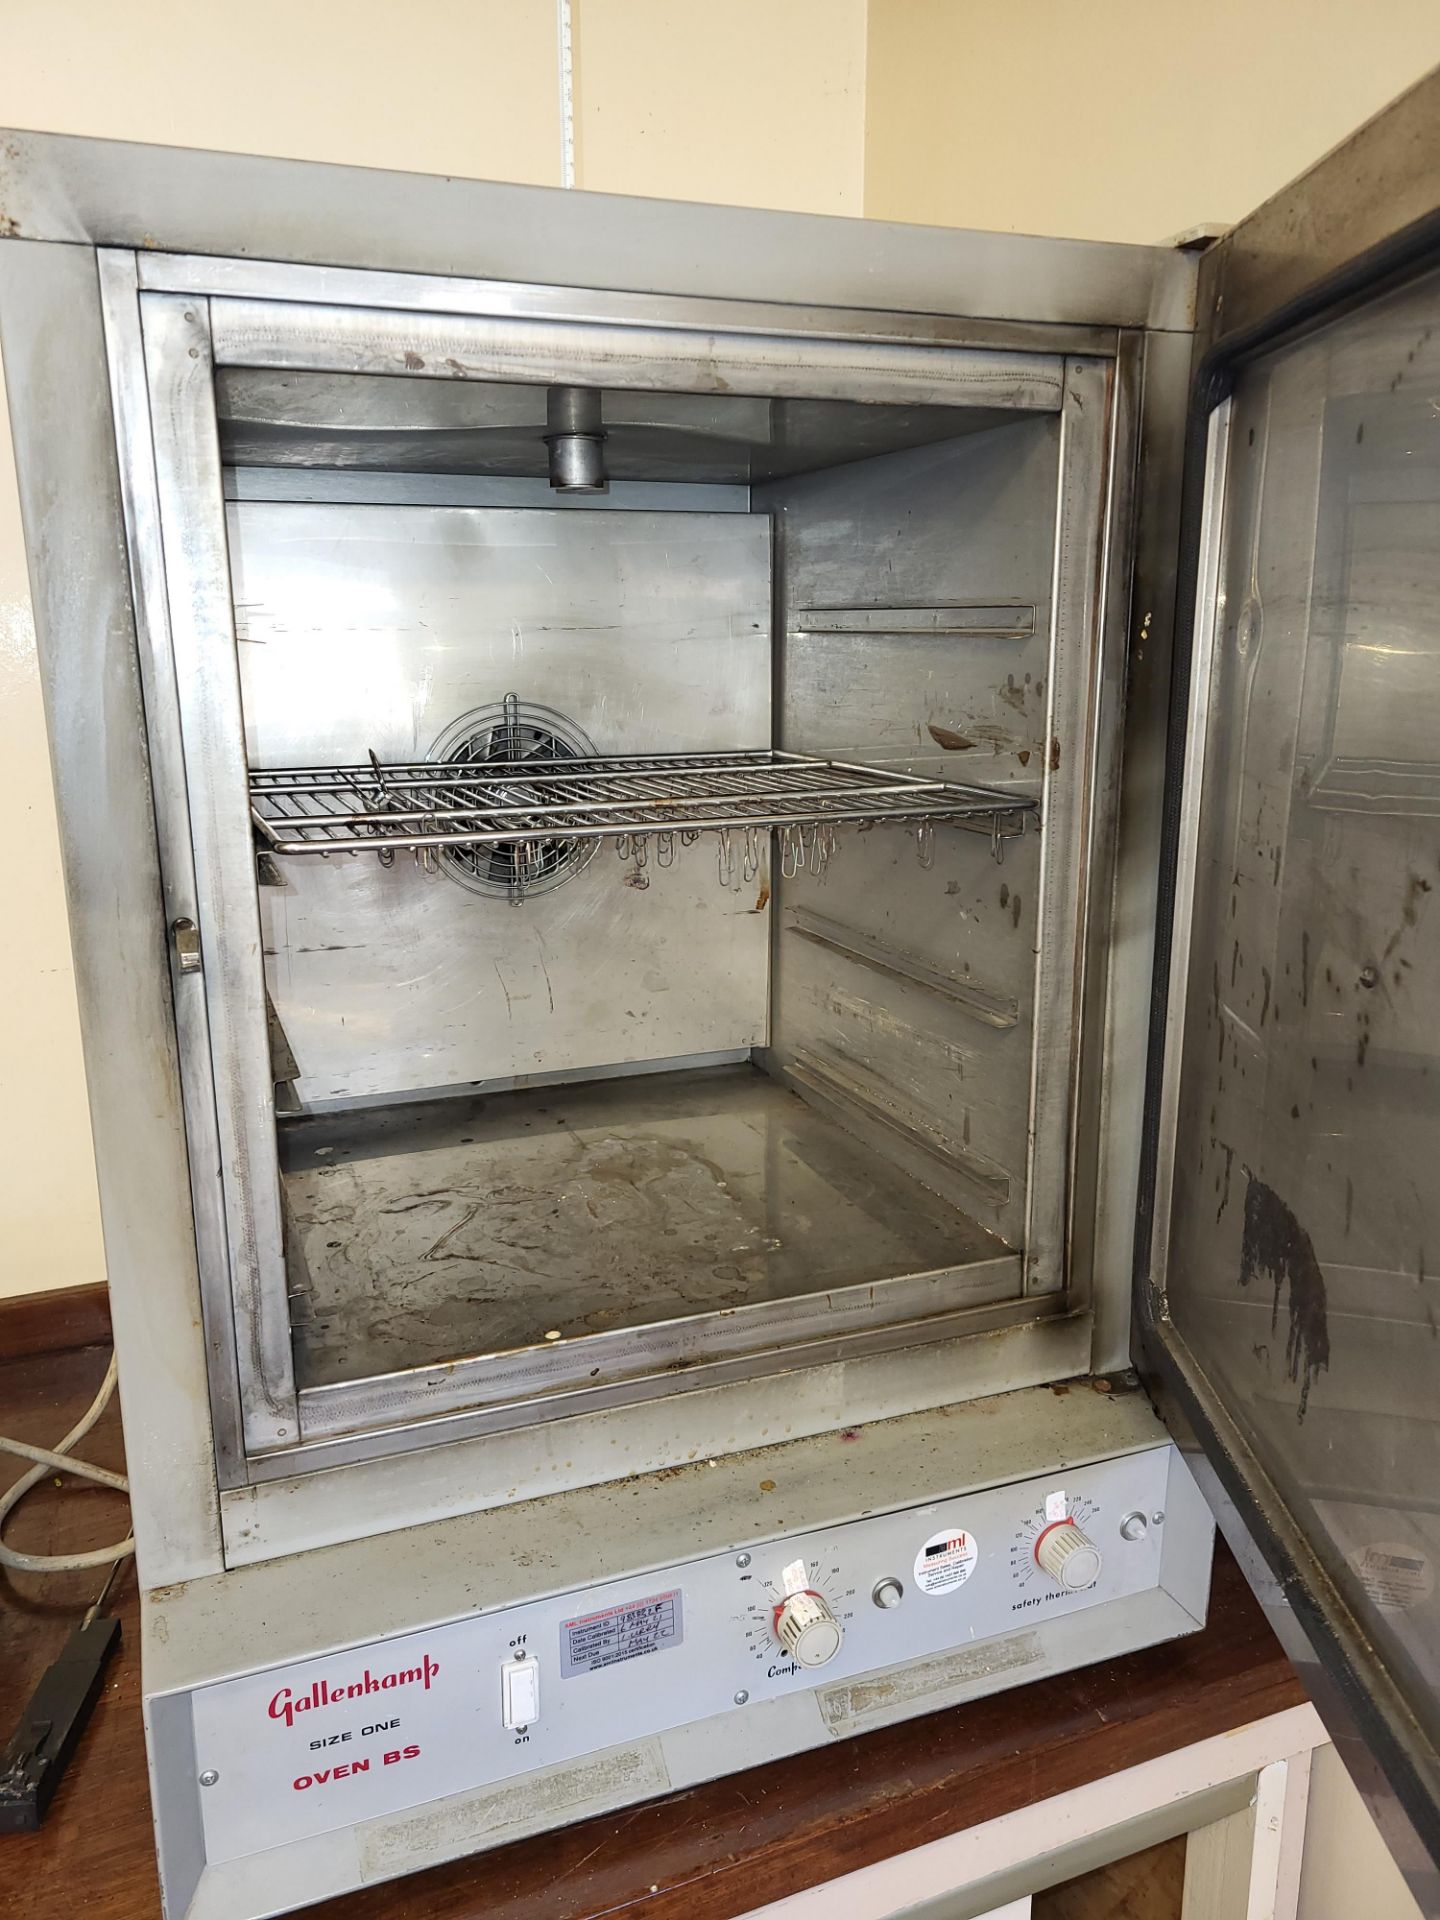 1 Gallenkamp One Size Oven BS. Cat No. OVH200010A - Image 3 of 3